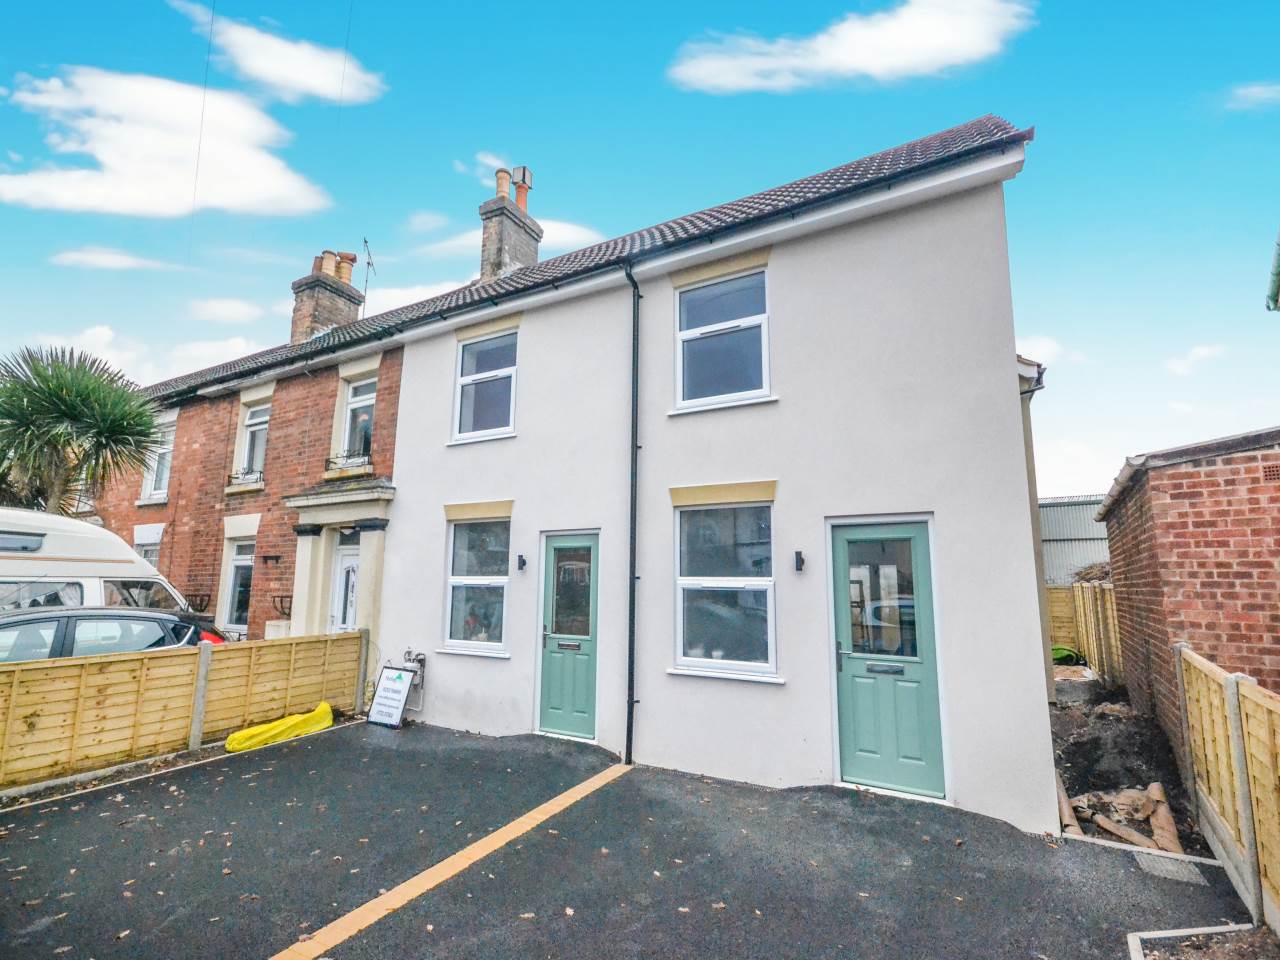 * NEW BUILD END TERRACE HOUSE * NEARING COMPLETION * TWO BEDROOMS * DOWNSTAIRS WC * LIVING ROOM * KITCHEN/DINER * CONTEMPORARY KITCHEN & BATHROOM * COURTYARD GARDEN * OFF ROAD PARKINIG * CLOSE TO TRAIN STATION * CLOSE TO TOWN CENTRE *  